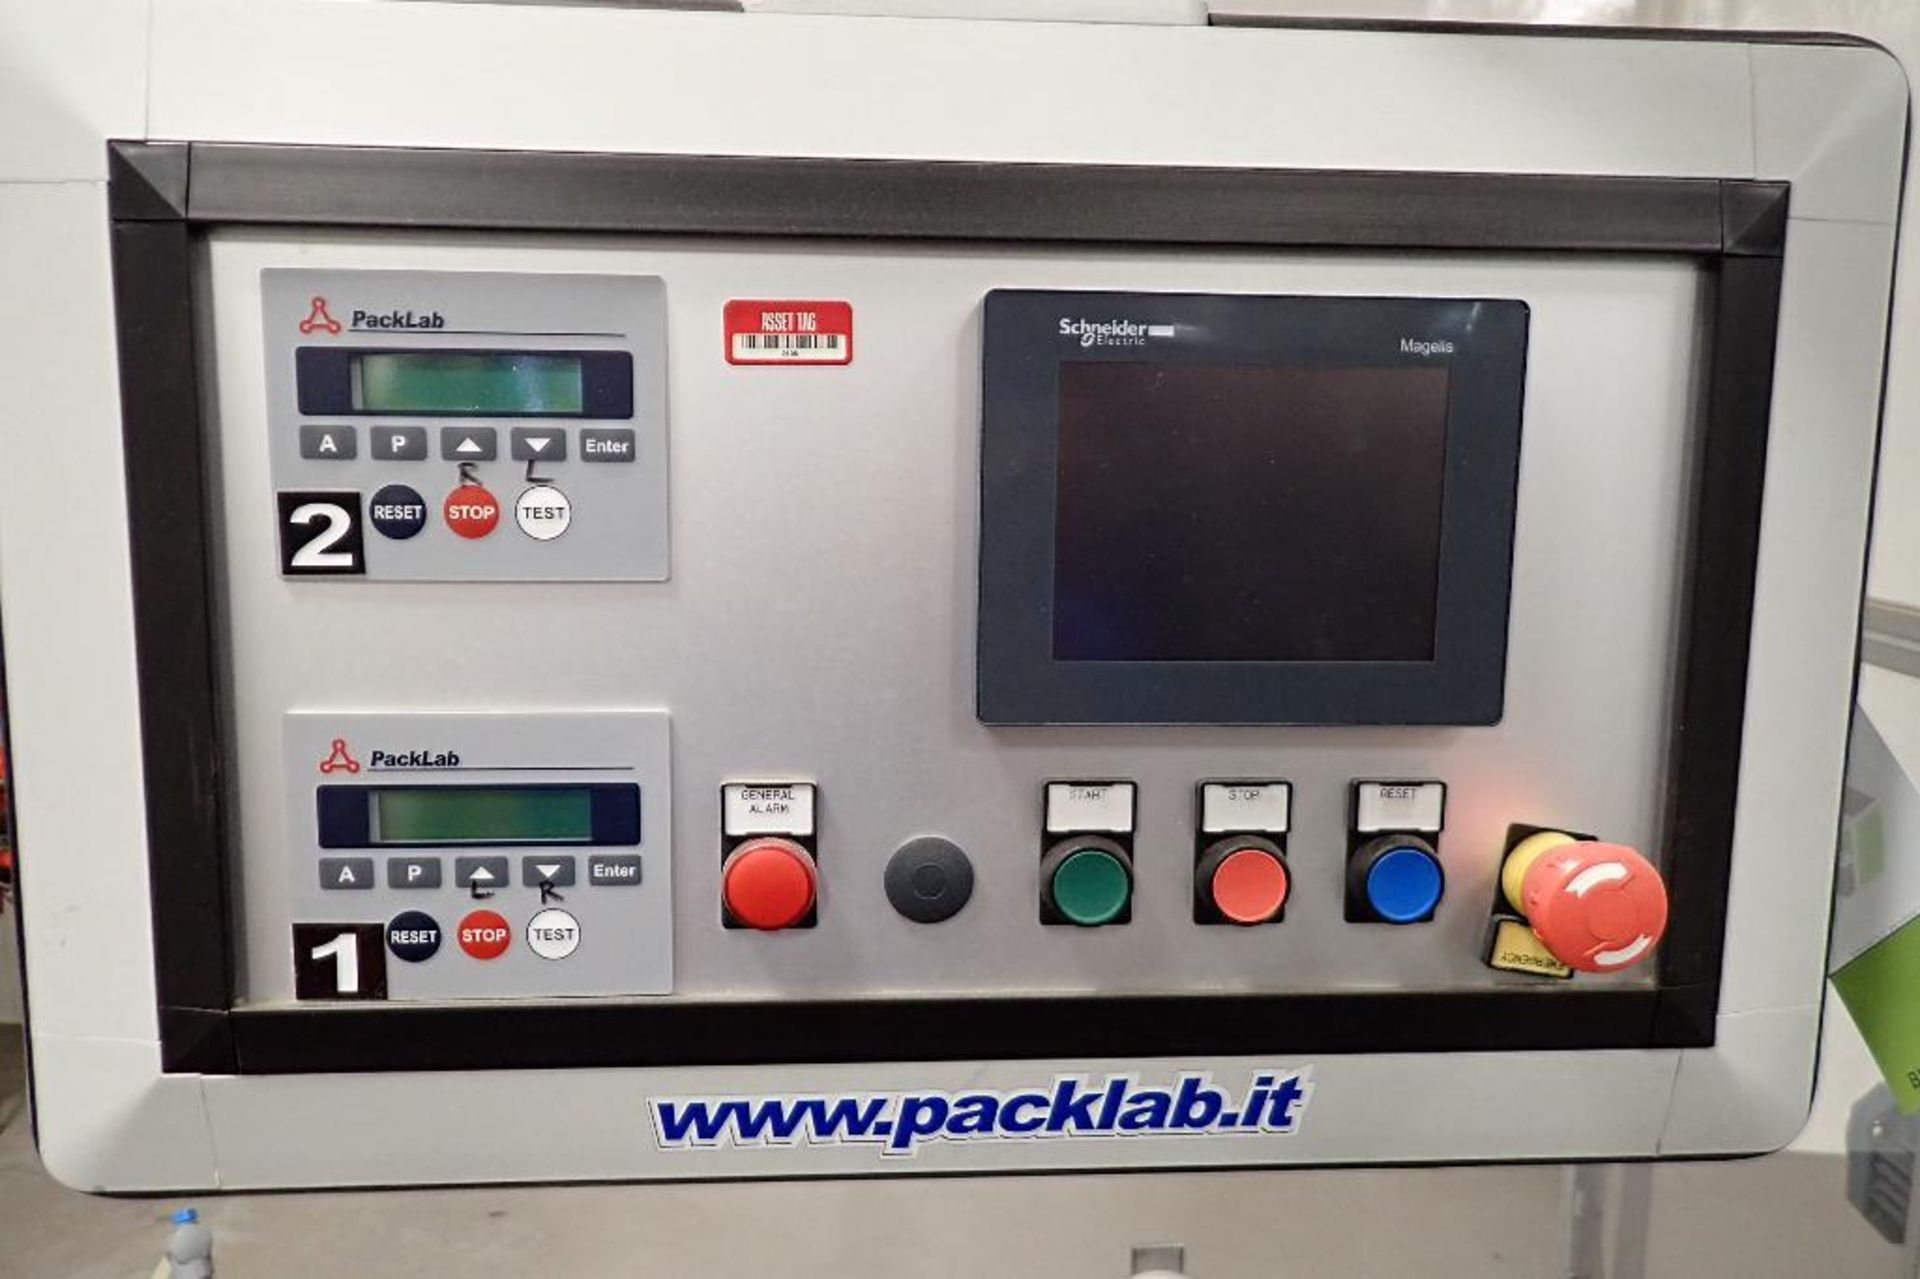 PackLab compact twin head labeler, controls, touch screen, conveyor running through is 13 ft. long x - Image 5 of 12